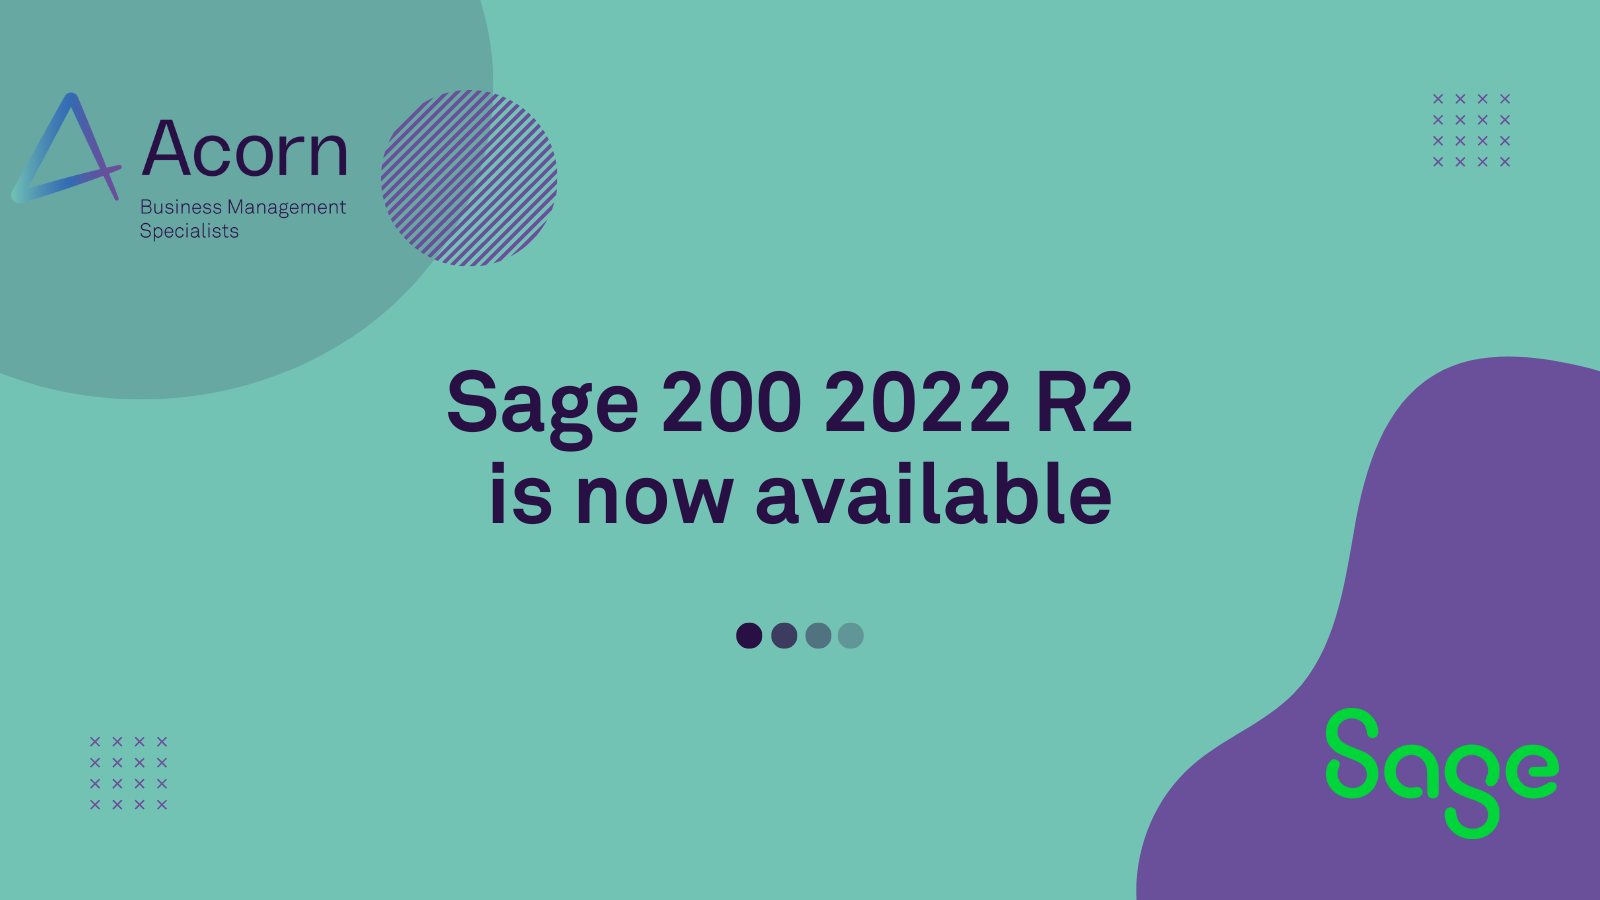 Sage 200 2022 R2 is now available